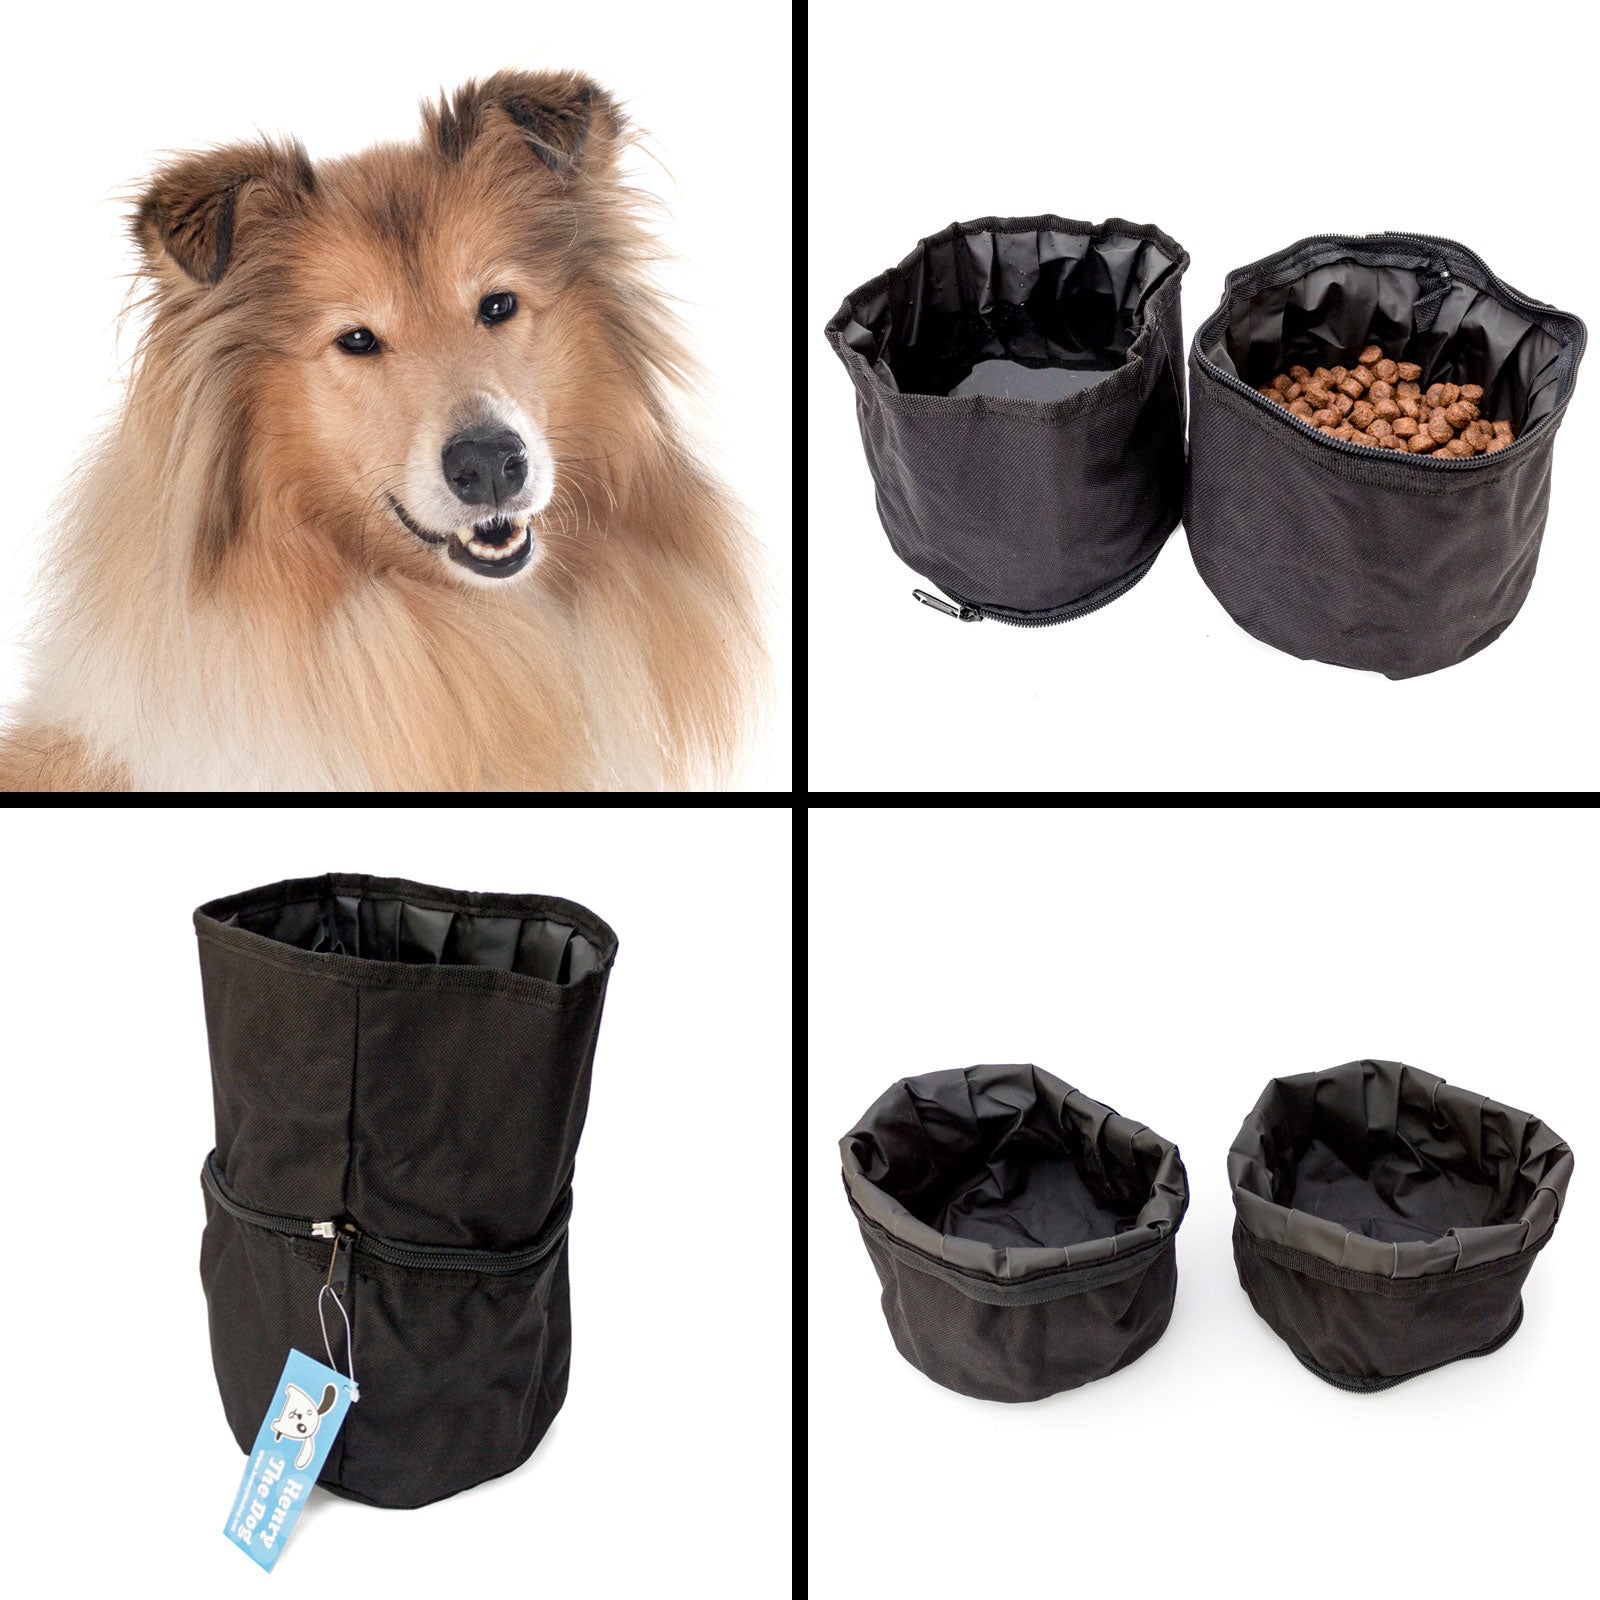 ROUGH COLLIE - Double Portable Travel Dog Bowl - Food And Water